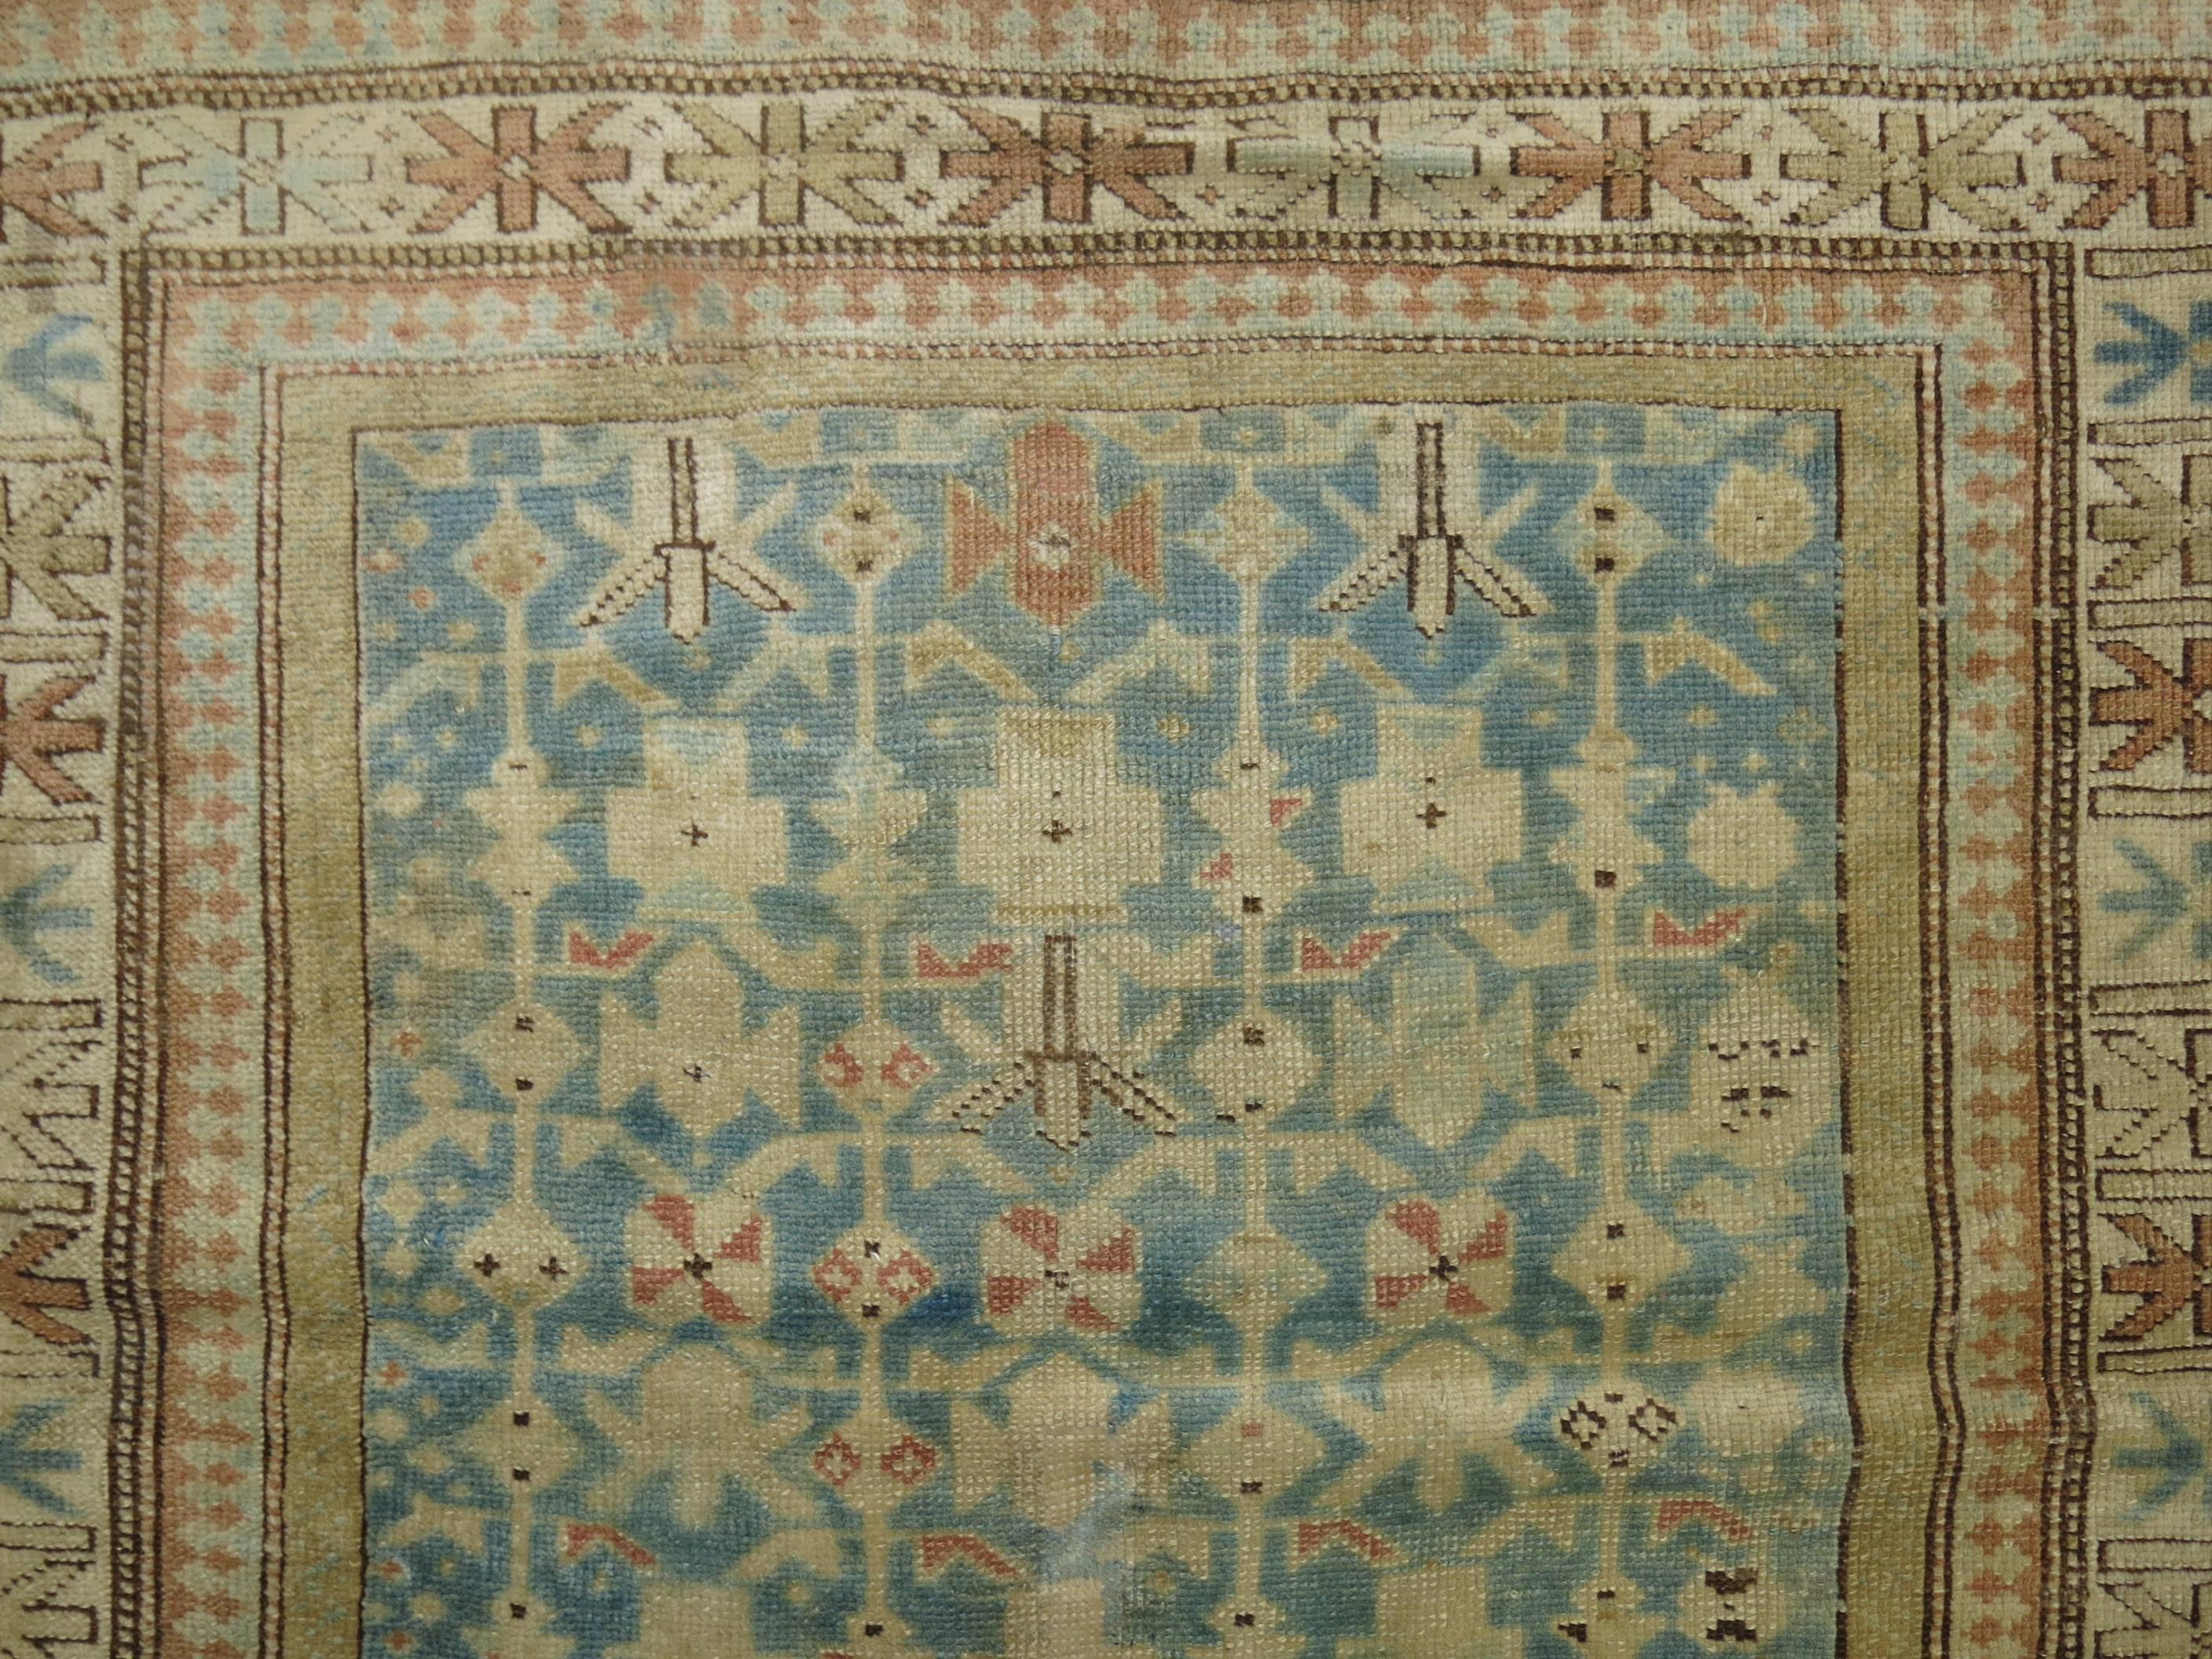 Decorative light blue colored early 20th century handmade Kuba rug in easy-going earthy palette.